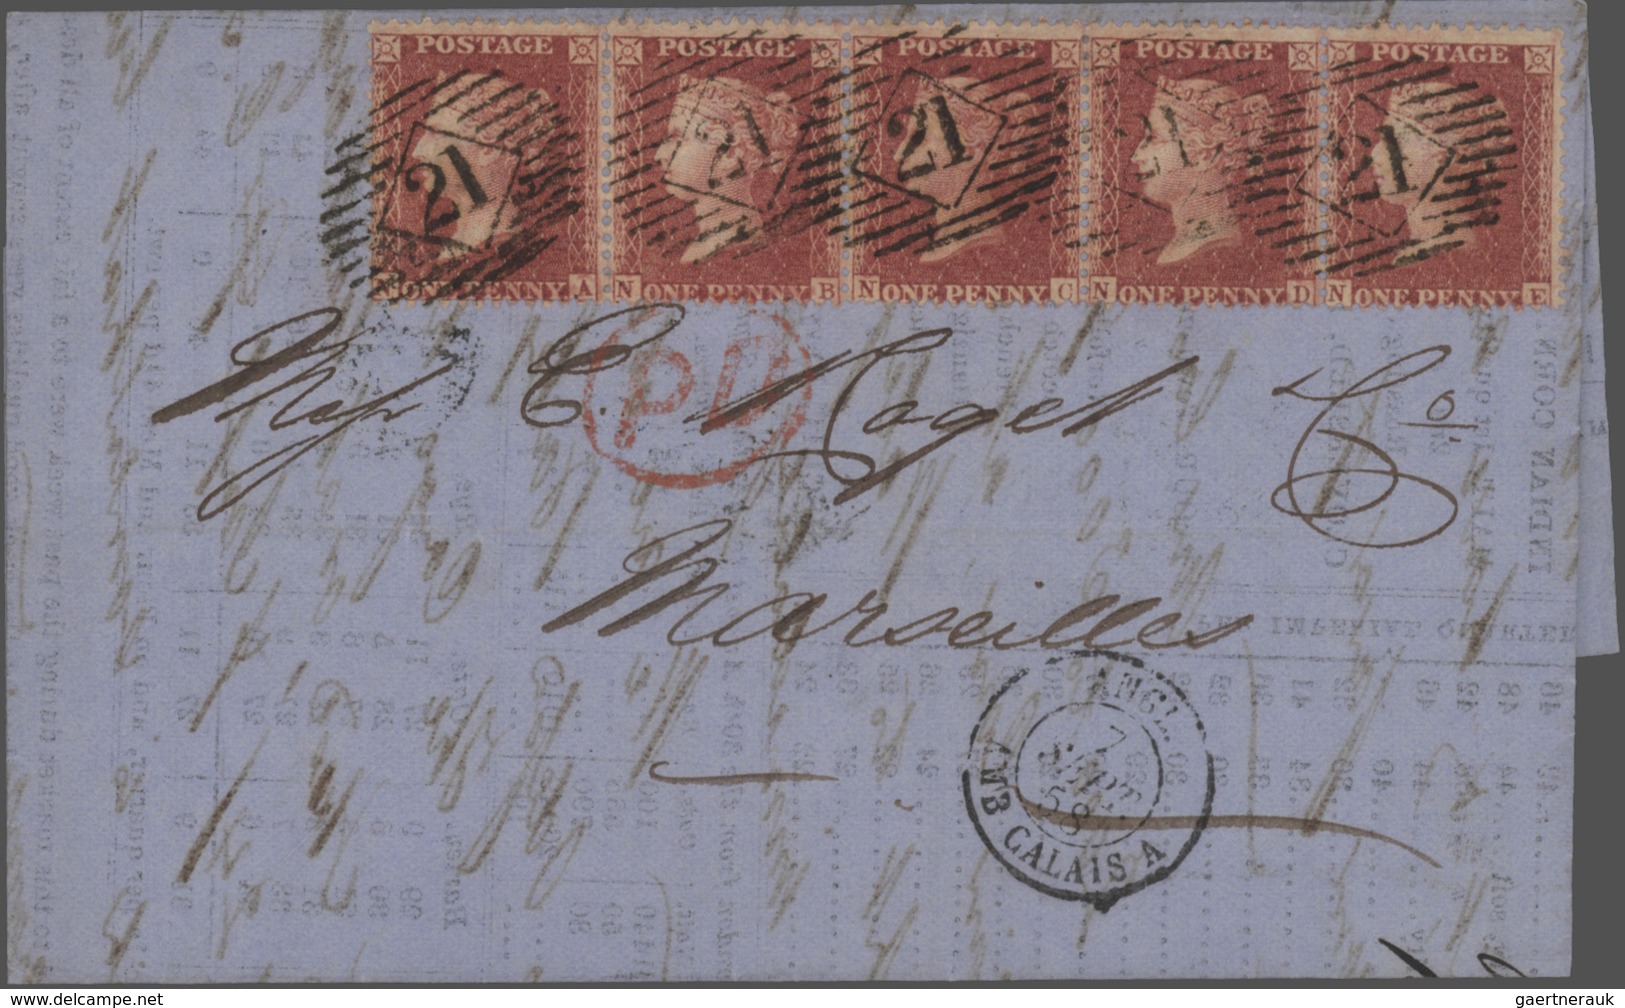 Br Großbritannien: 1836/1946: 77 better covers and postal stationeries including pre-philatelic, used A